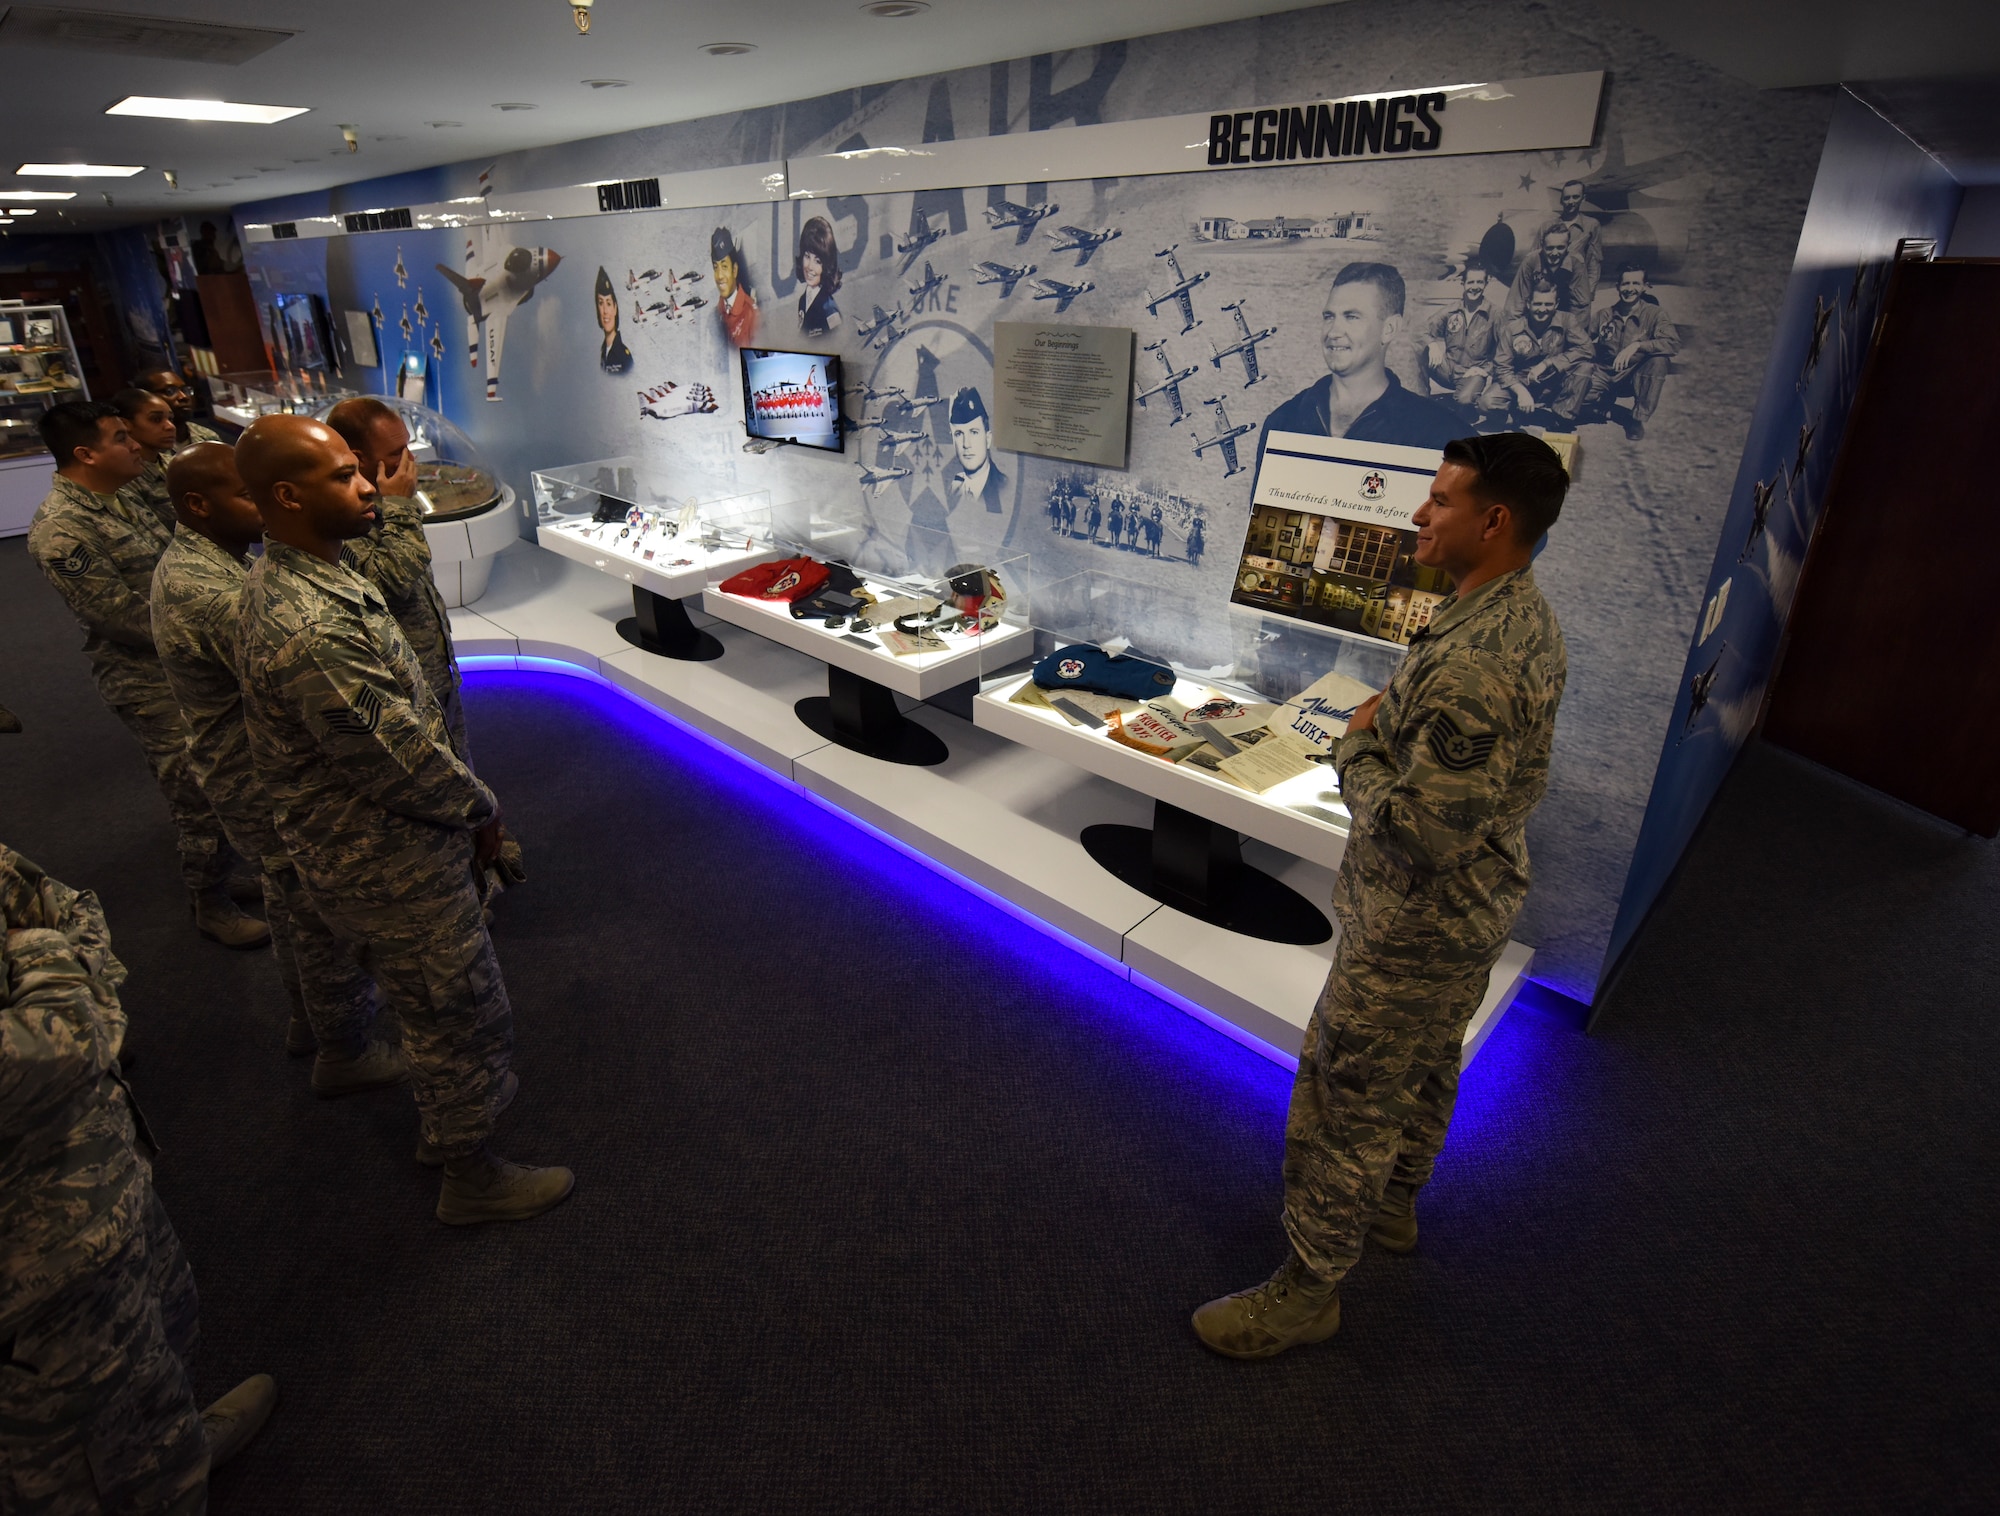 Tech. Sgt. Daniel Wolfrum, Thunderbirds plans and scheduling NCO in charge, conducts a tour of the Thunderbird museum at Nellis Air Force Base, Nevada, Aug. 16, 2018. The museum displays Thunderbirds heritage, memorabilia and current team members. (U.S. Air Force photo by Airman 1st Class Andrew D. Sarver)